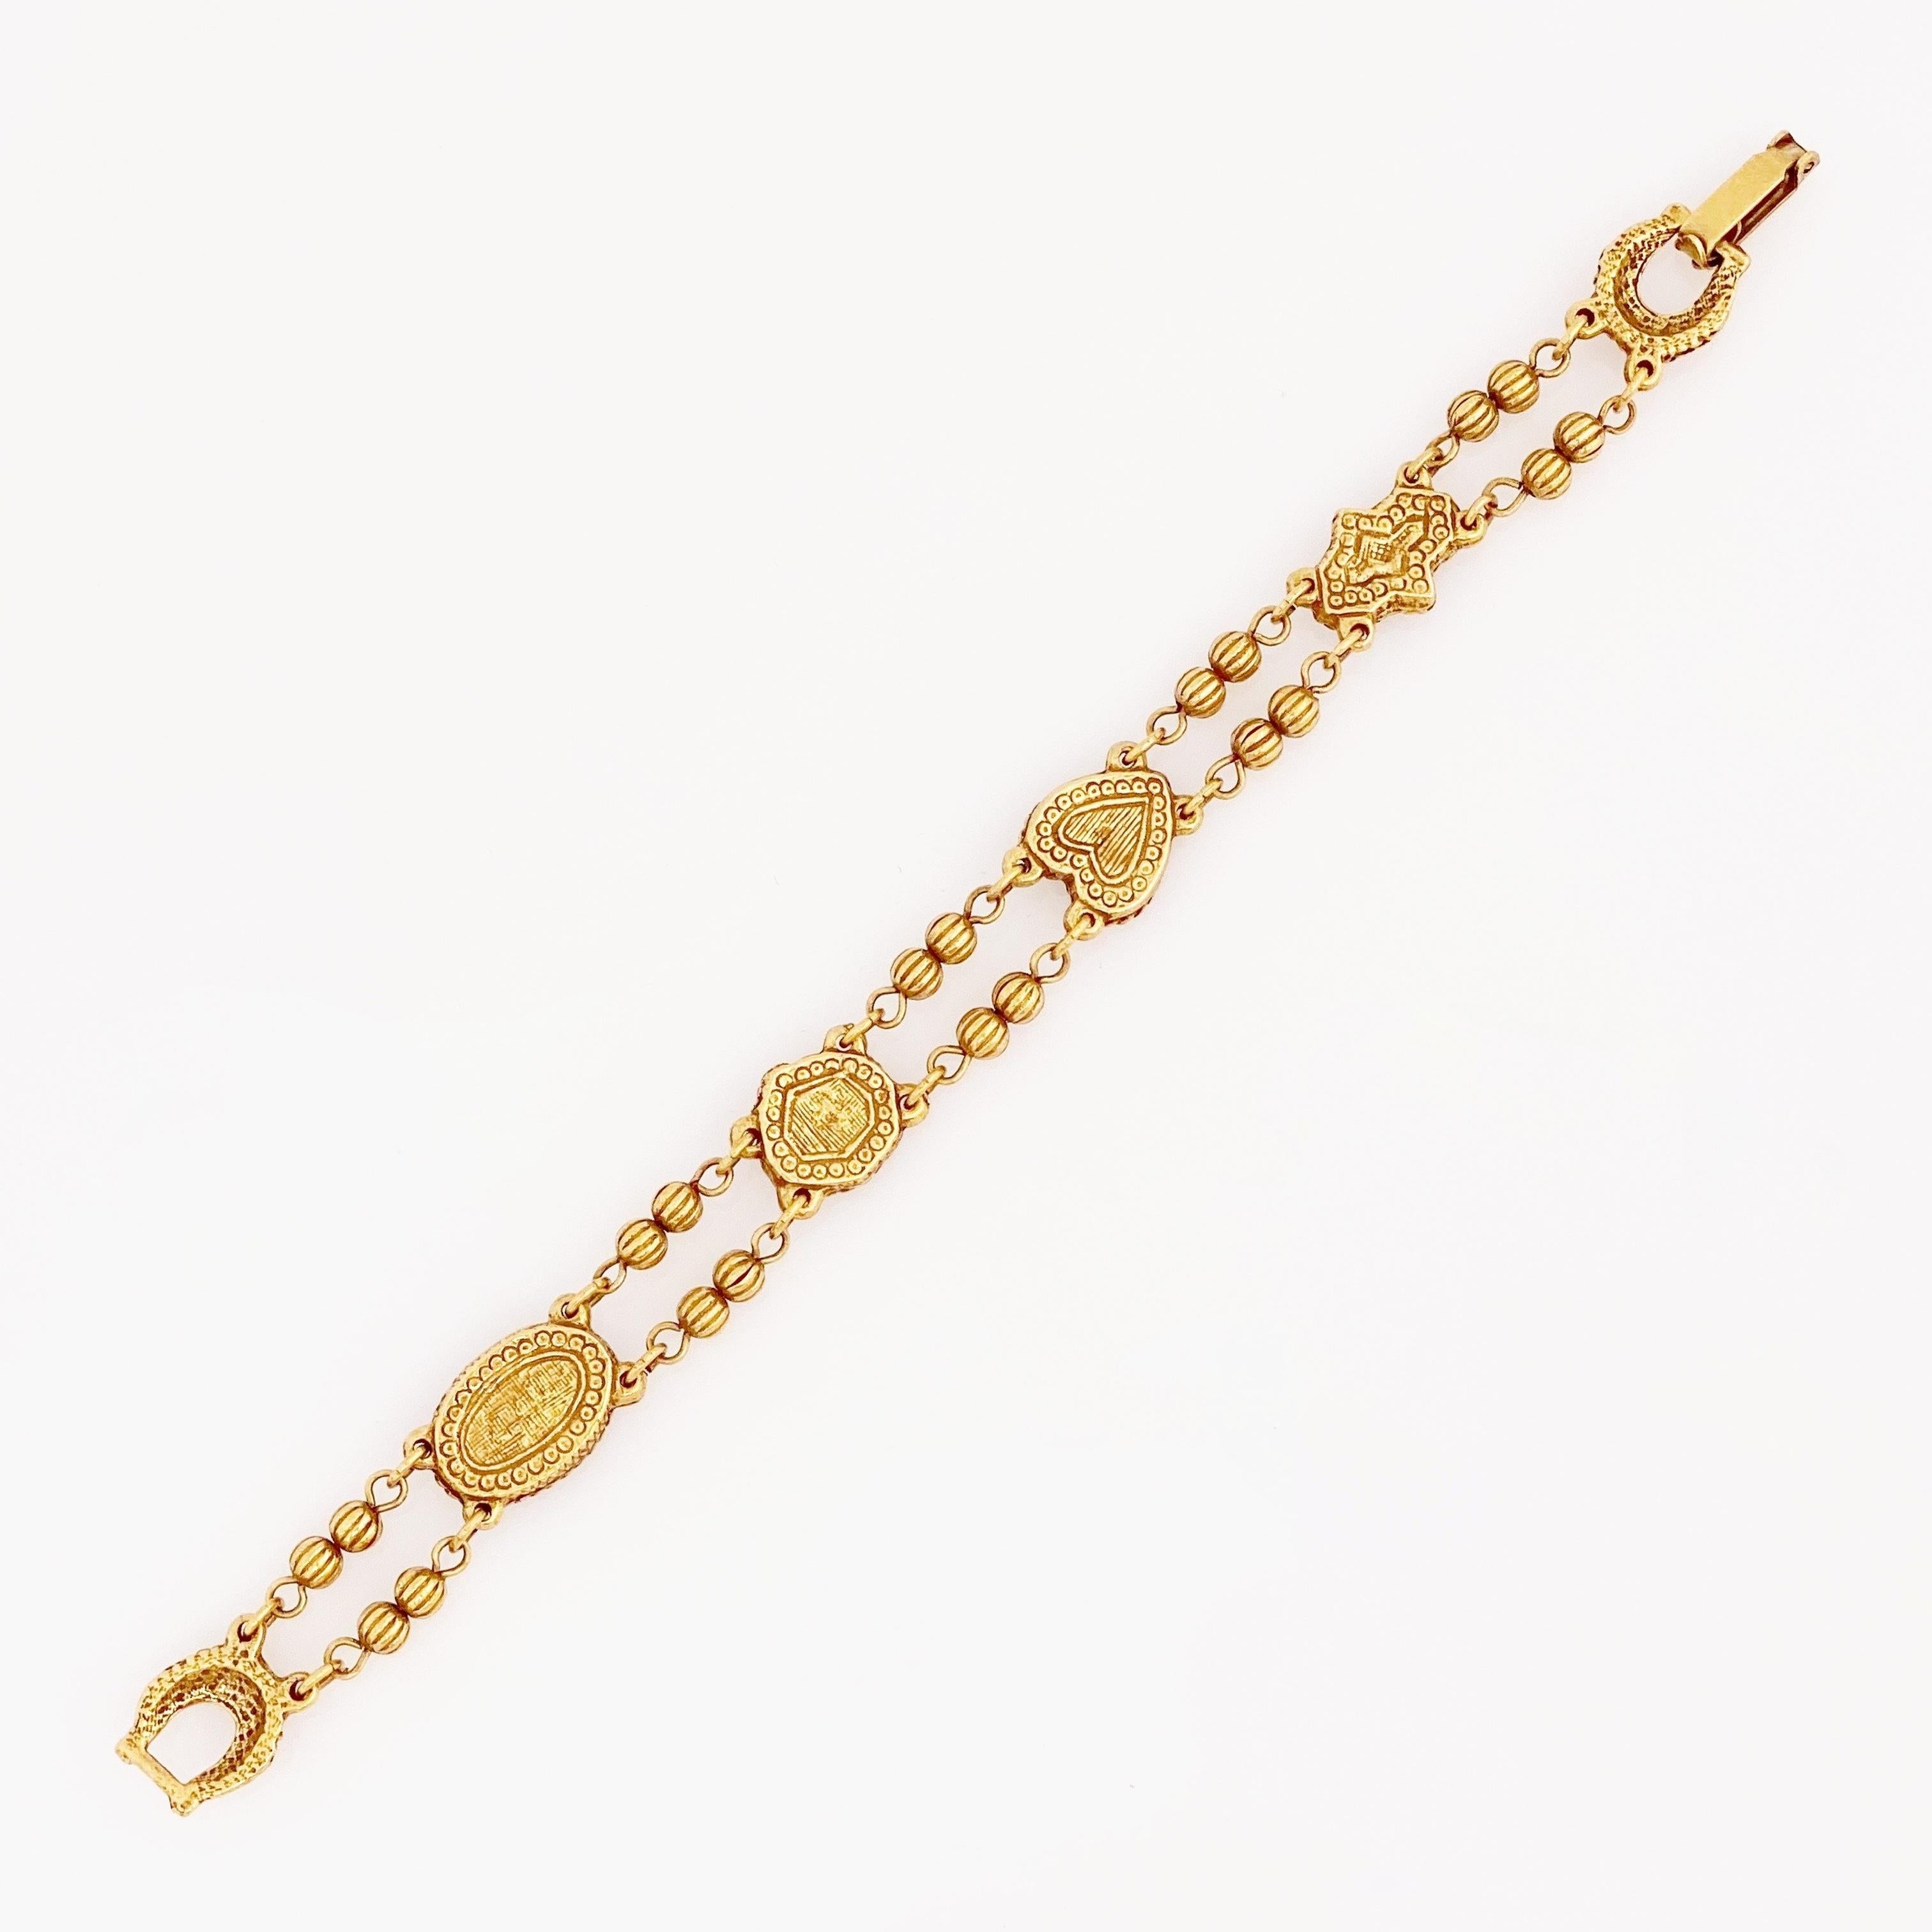 Gold Beaded Victorian Revival Bracelet With Clover & Heart Motif, 1960s 1